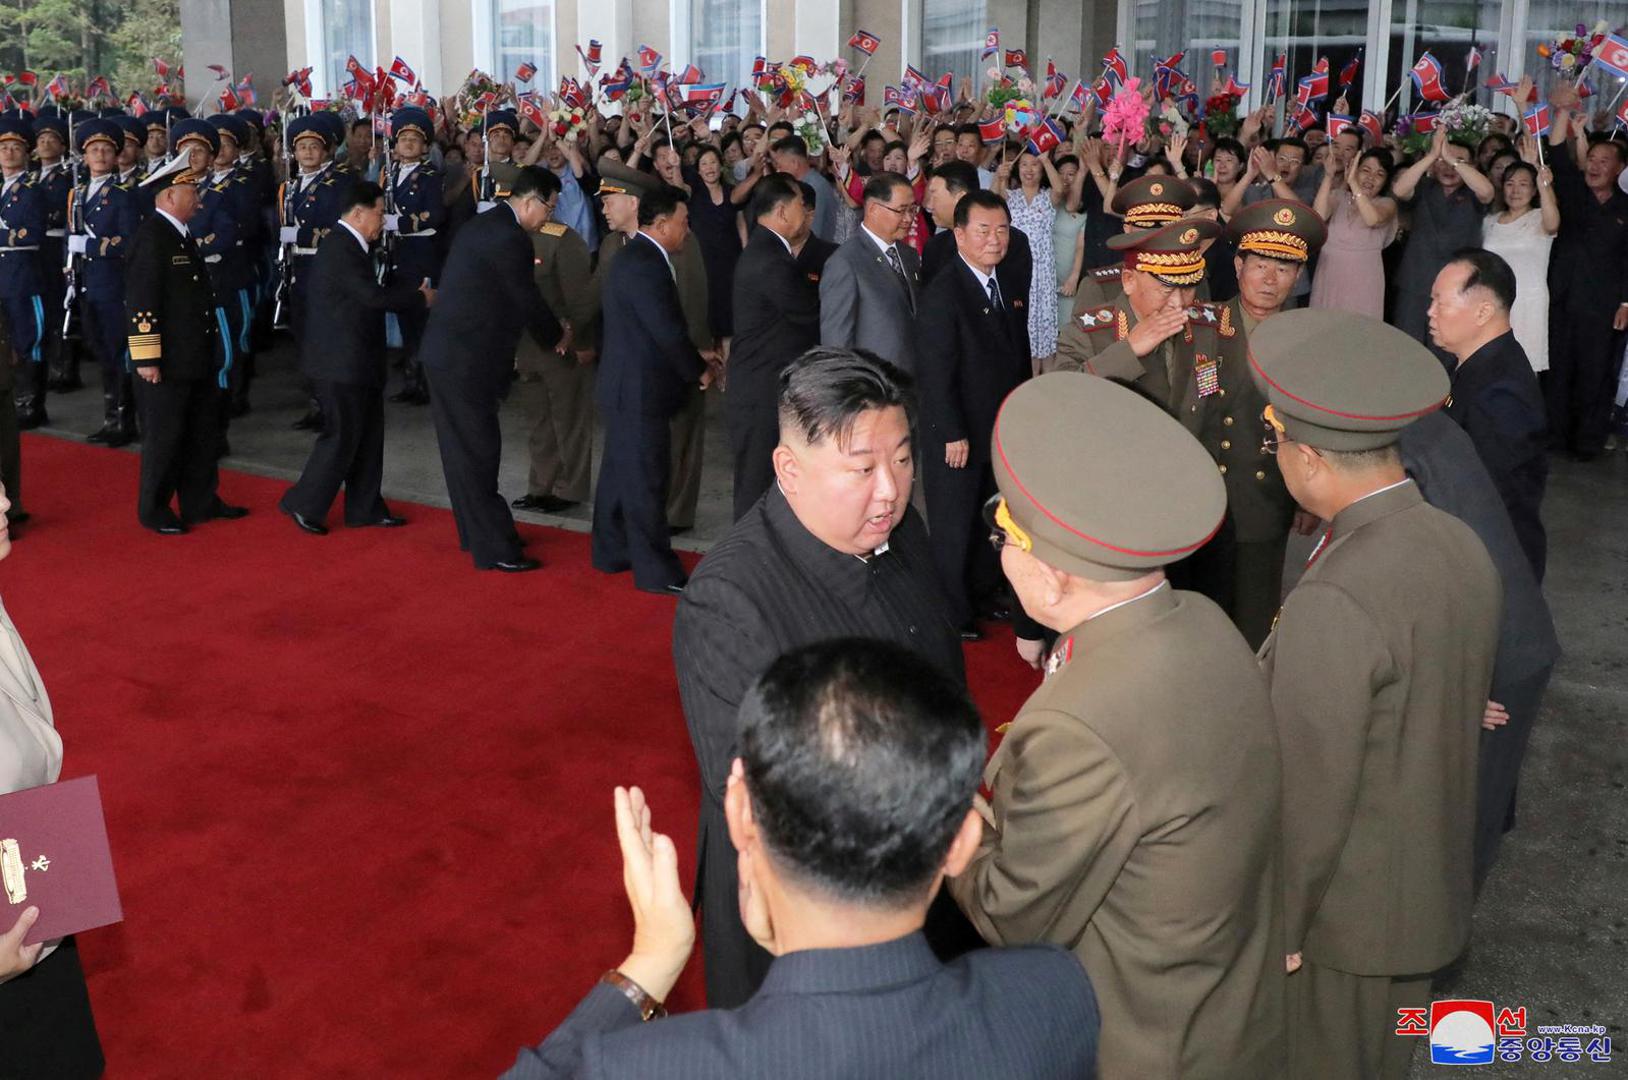 North Korean leader Kim Jong Un, accompanied by Ri Pyong Chol, Vice Chairman of the ruling Workers' Party's Central Military Commission, Pak Jong Chon, the new head of the party's military-political leadership, Su Yong, party secretary and director of the economy department, Pak Thae Song, party secretary and chairman of a national space science and technology committee, depart Pyongyang, North Korea, to visit Russia, September 10, 2023, in this image released by North Korea's Korean Central News Agency on September 12, 2023.   KCNA via REUTERS    ATTENTION EDITORS - THIS IMAGE WAS PROVIDED BY A THIRD PARTY. REUTERS IS UNABLE TO INDEPENDENTLY VERIFY THIS IMAGE. NO THIRD PARTY SALES. SOUTH KOREA OUT. NO COMMERCIAL OR EDITORIAL SALES IN SOUTH KOREA. Photo: KCNA/REUTERS